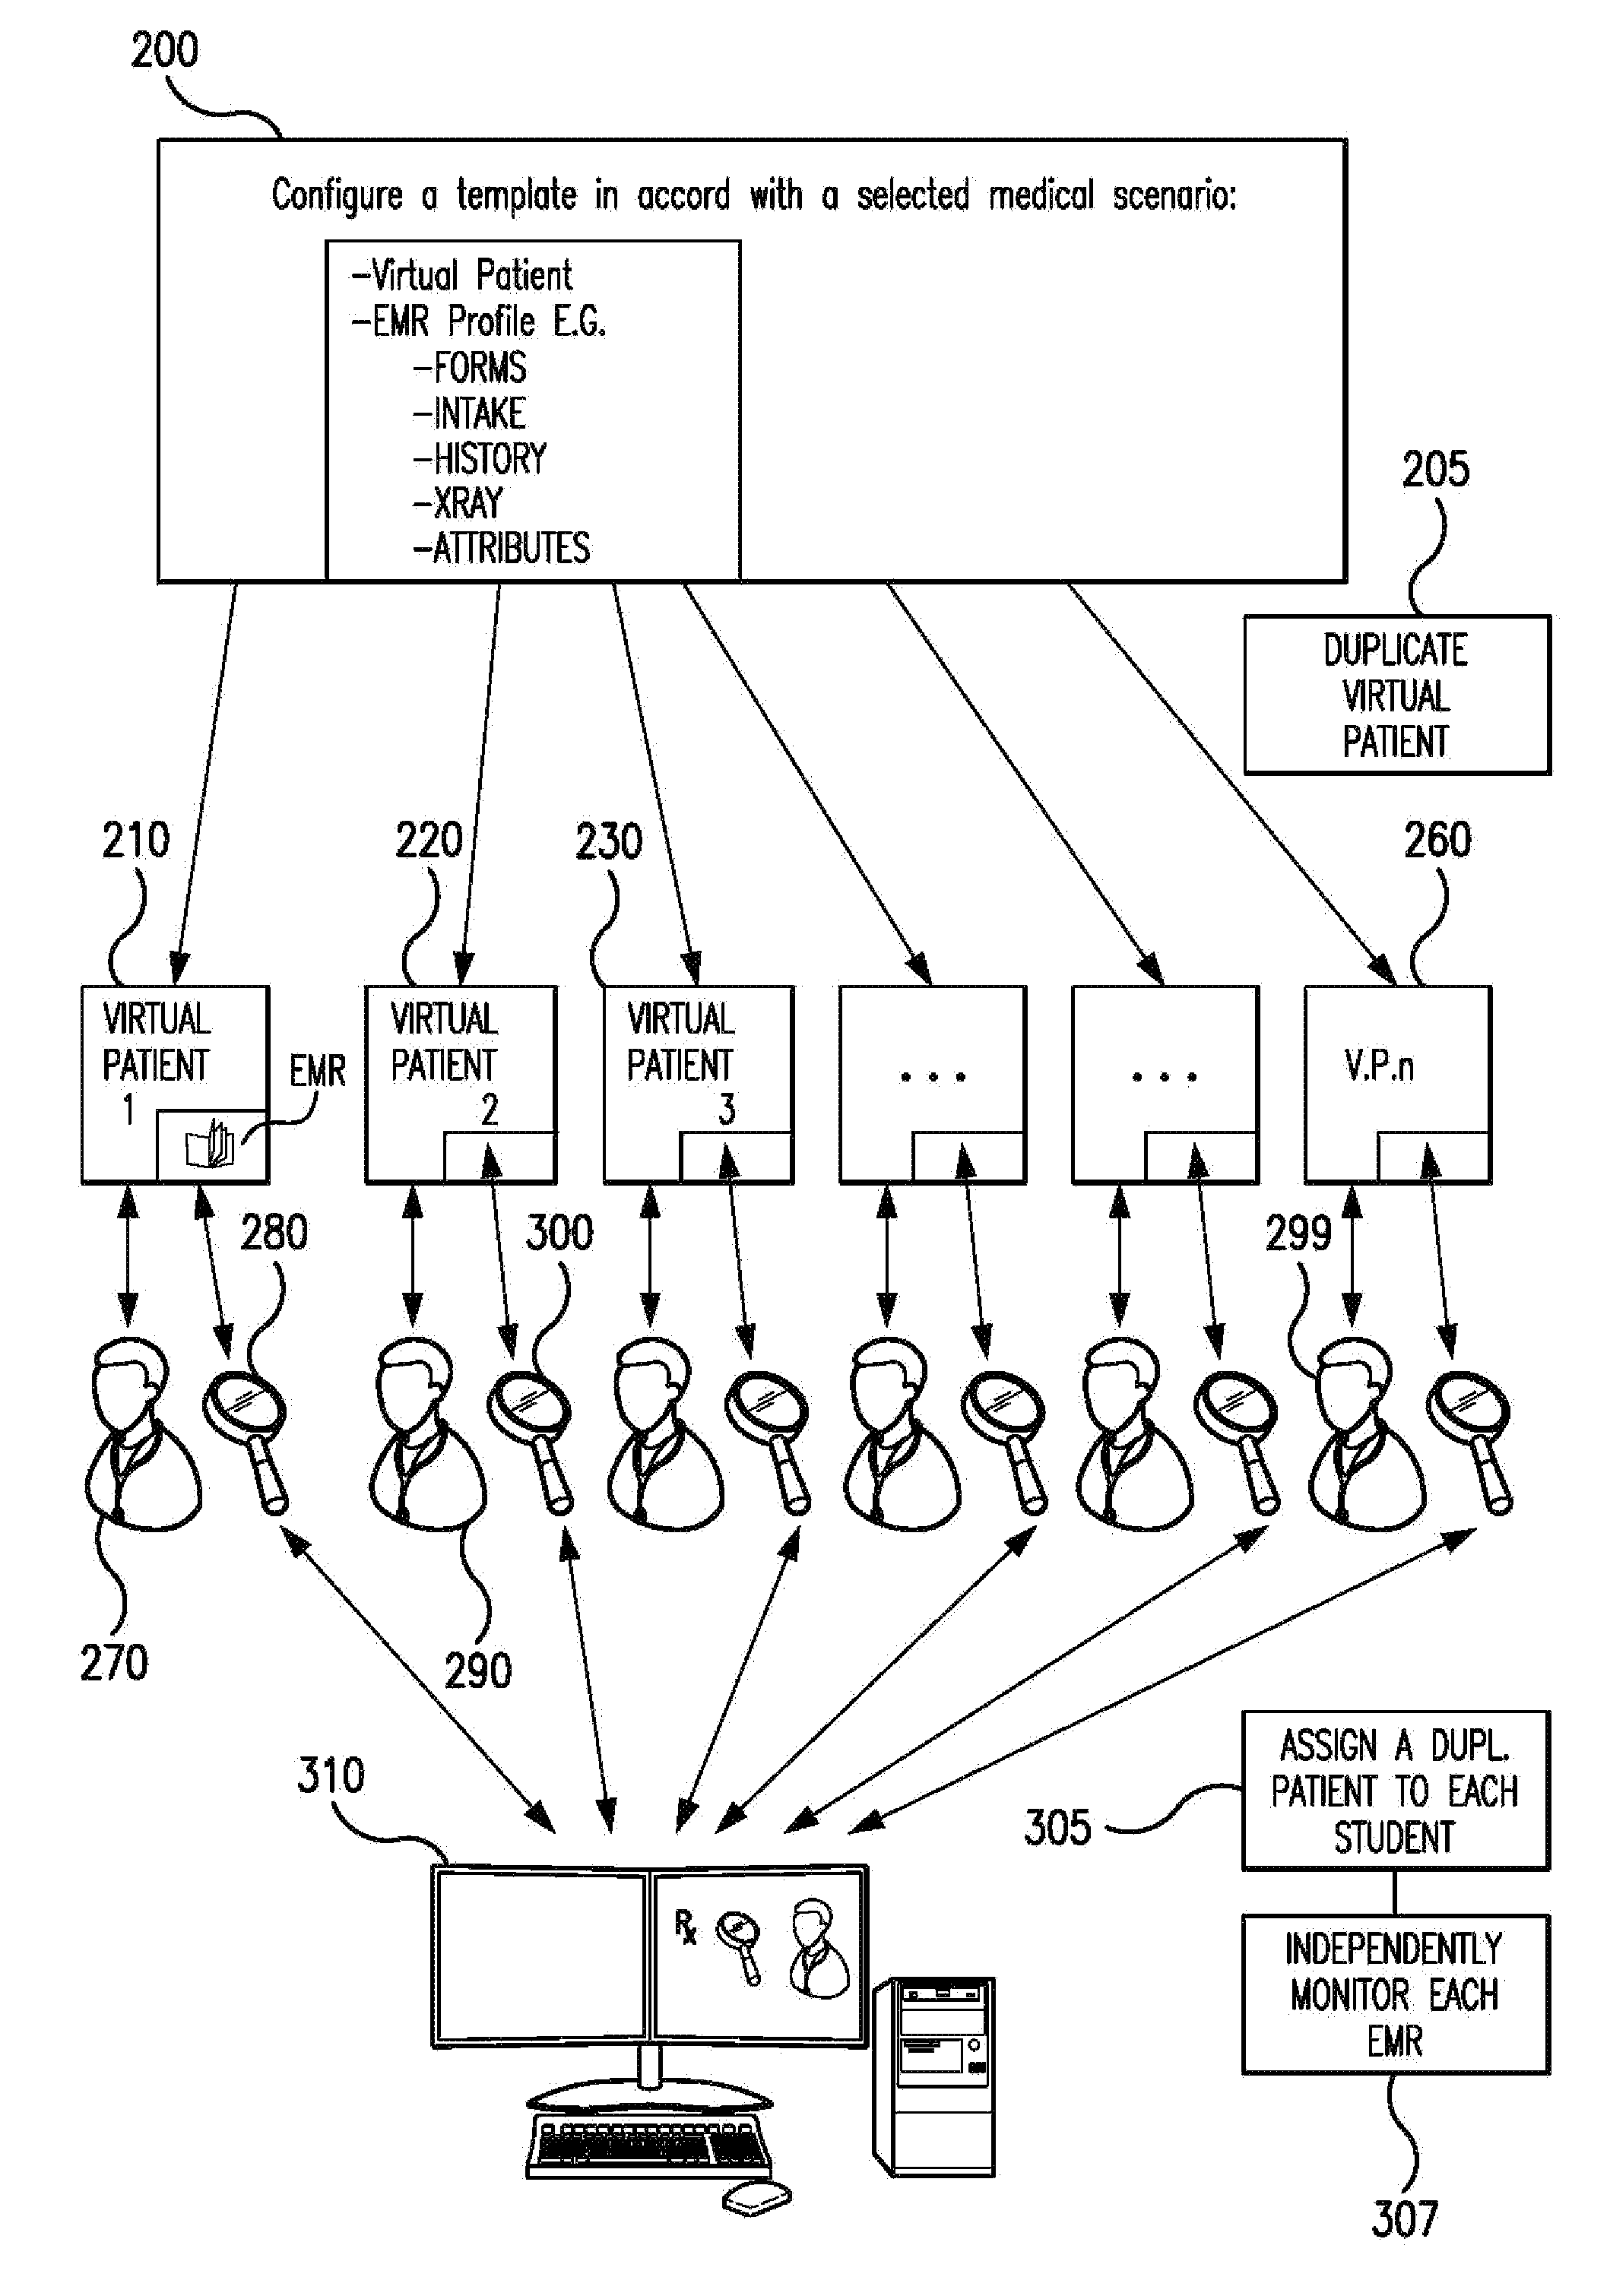 System and method for clinical patient care simulation and evaluation